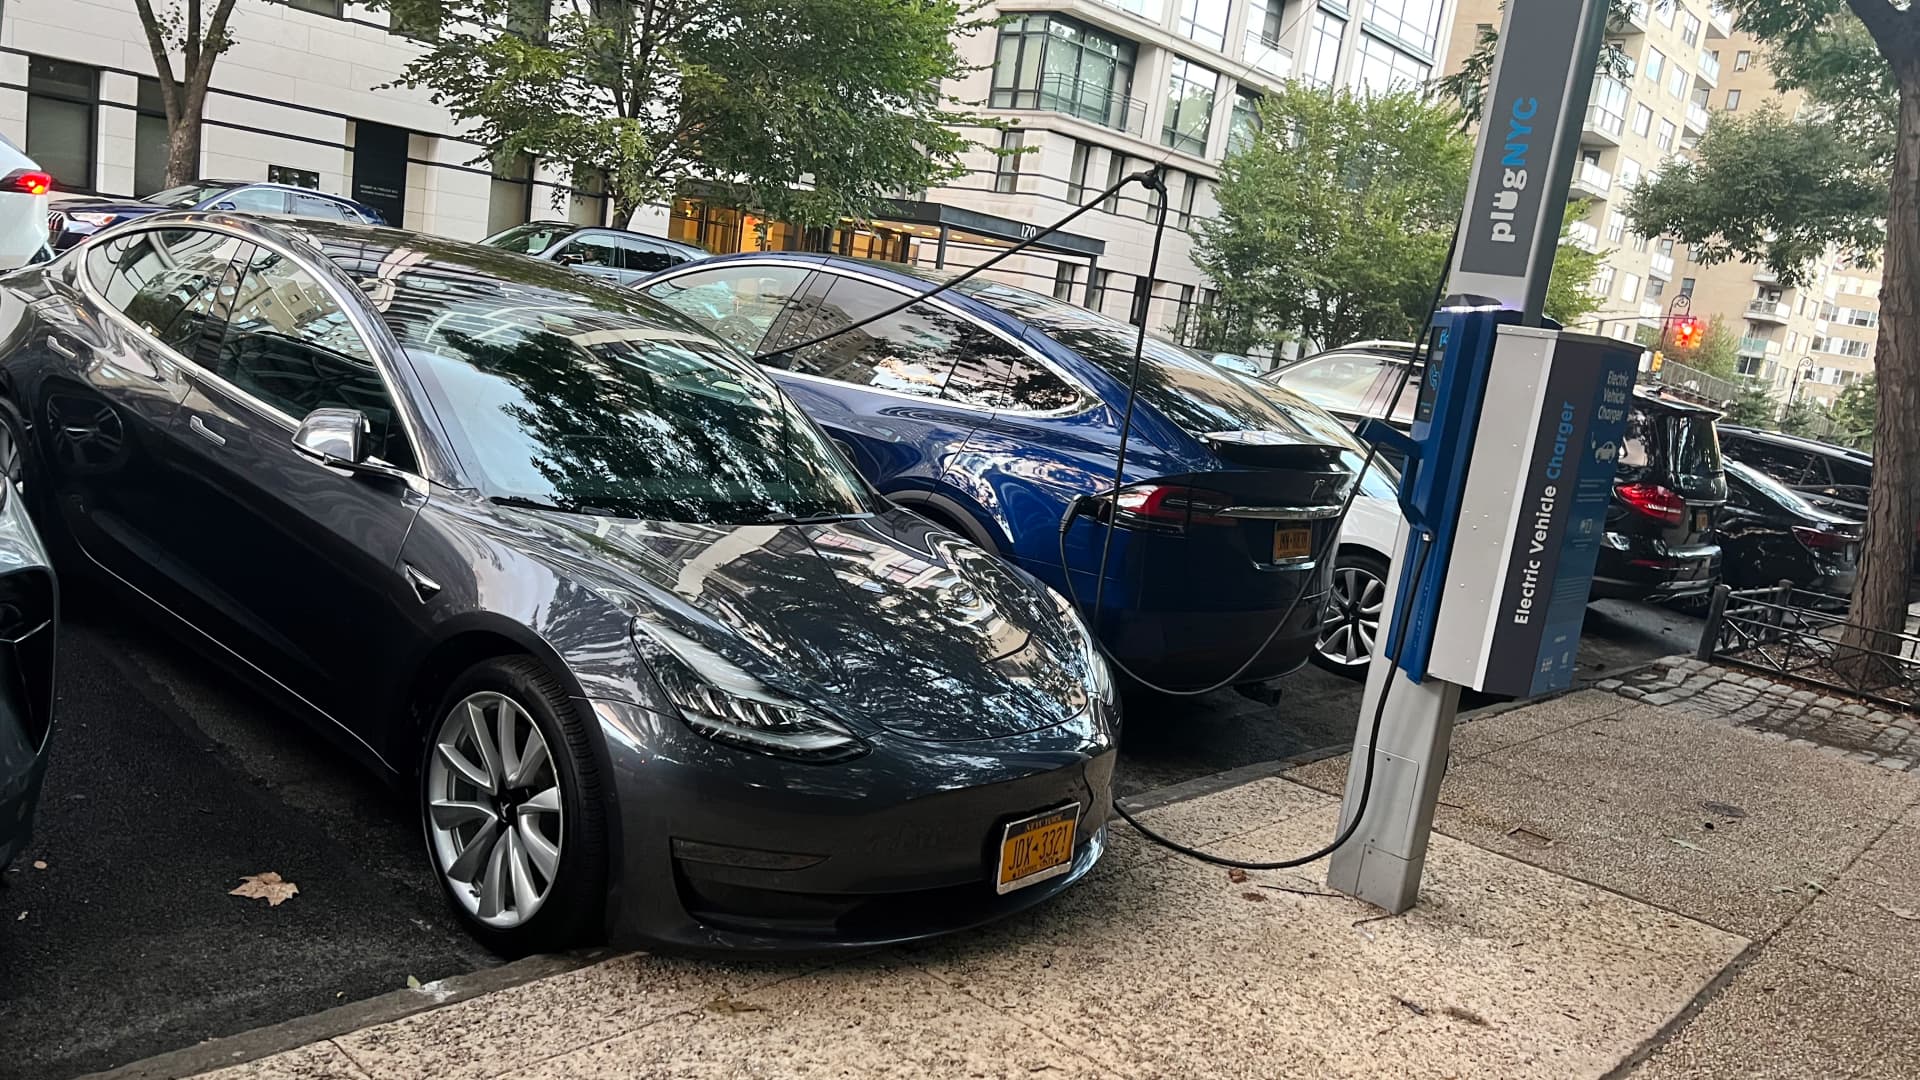 Auto executives are less confident in EV adoption than they were a year ago